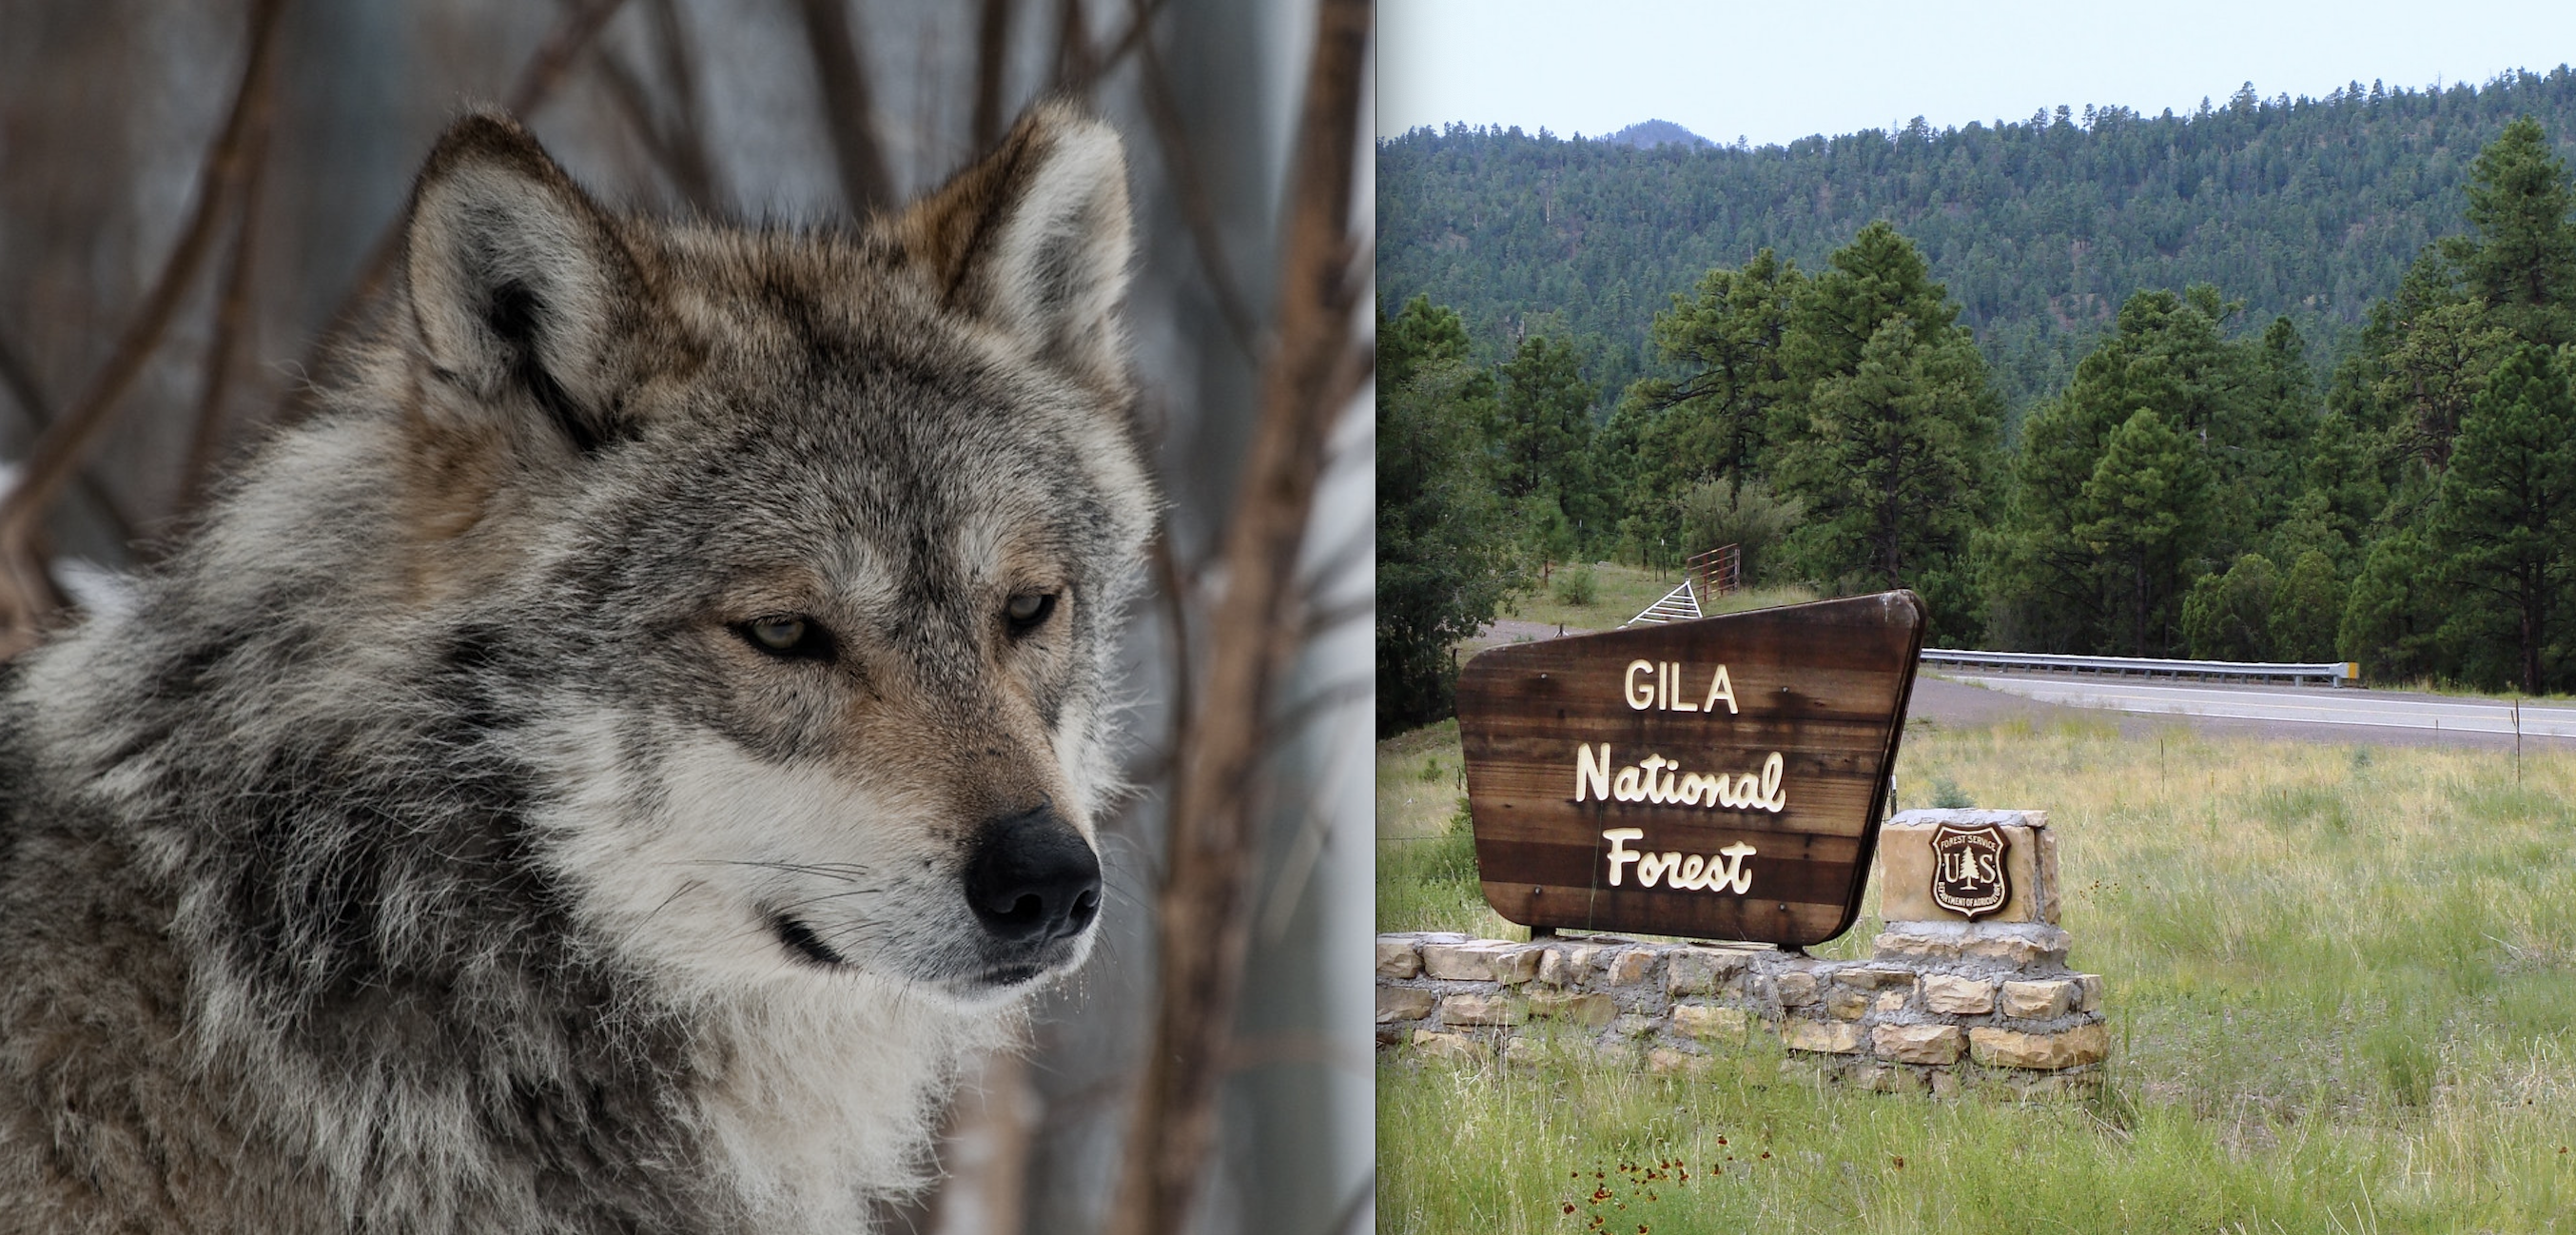 ‘Loser’: Rancher Who Bludgeoned Rare, Endangered Mex. Wolf to Death, Stripped of Grazing Permits in Gila Ntl. Forest; Still no Animal Cruelty Charges